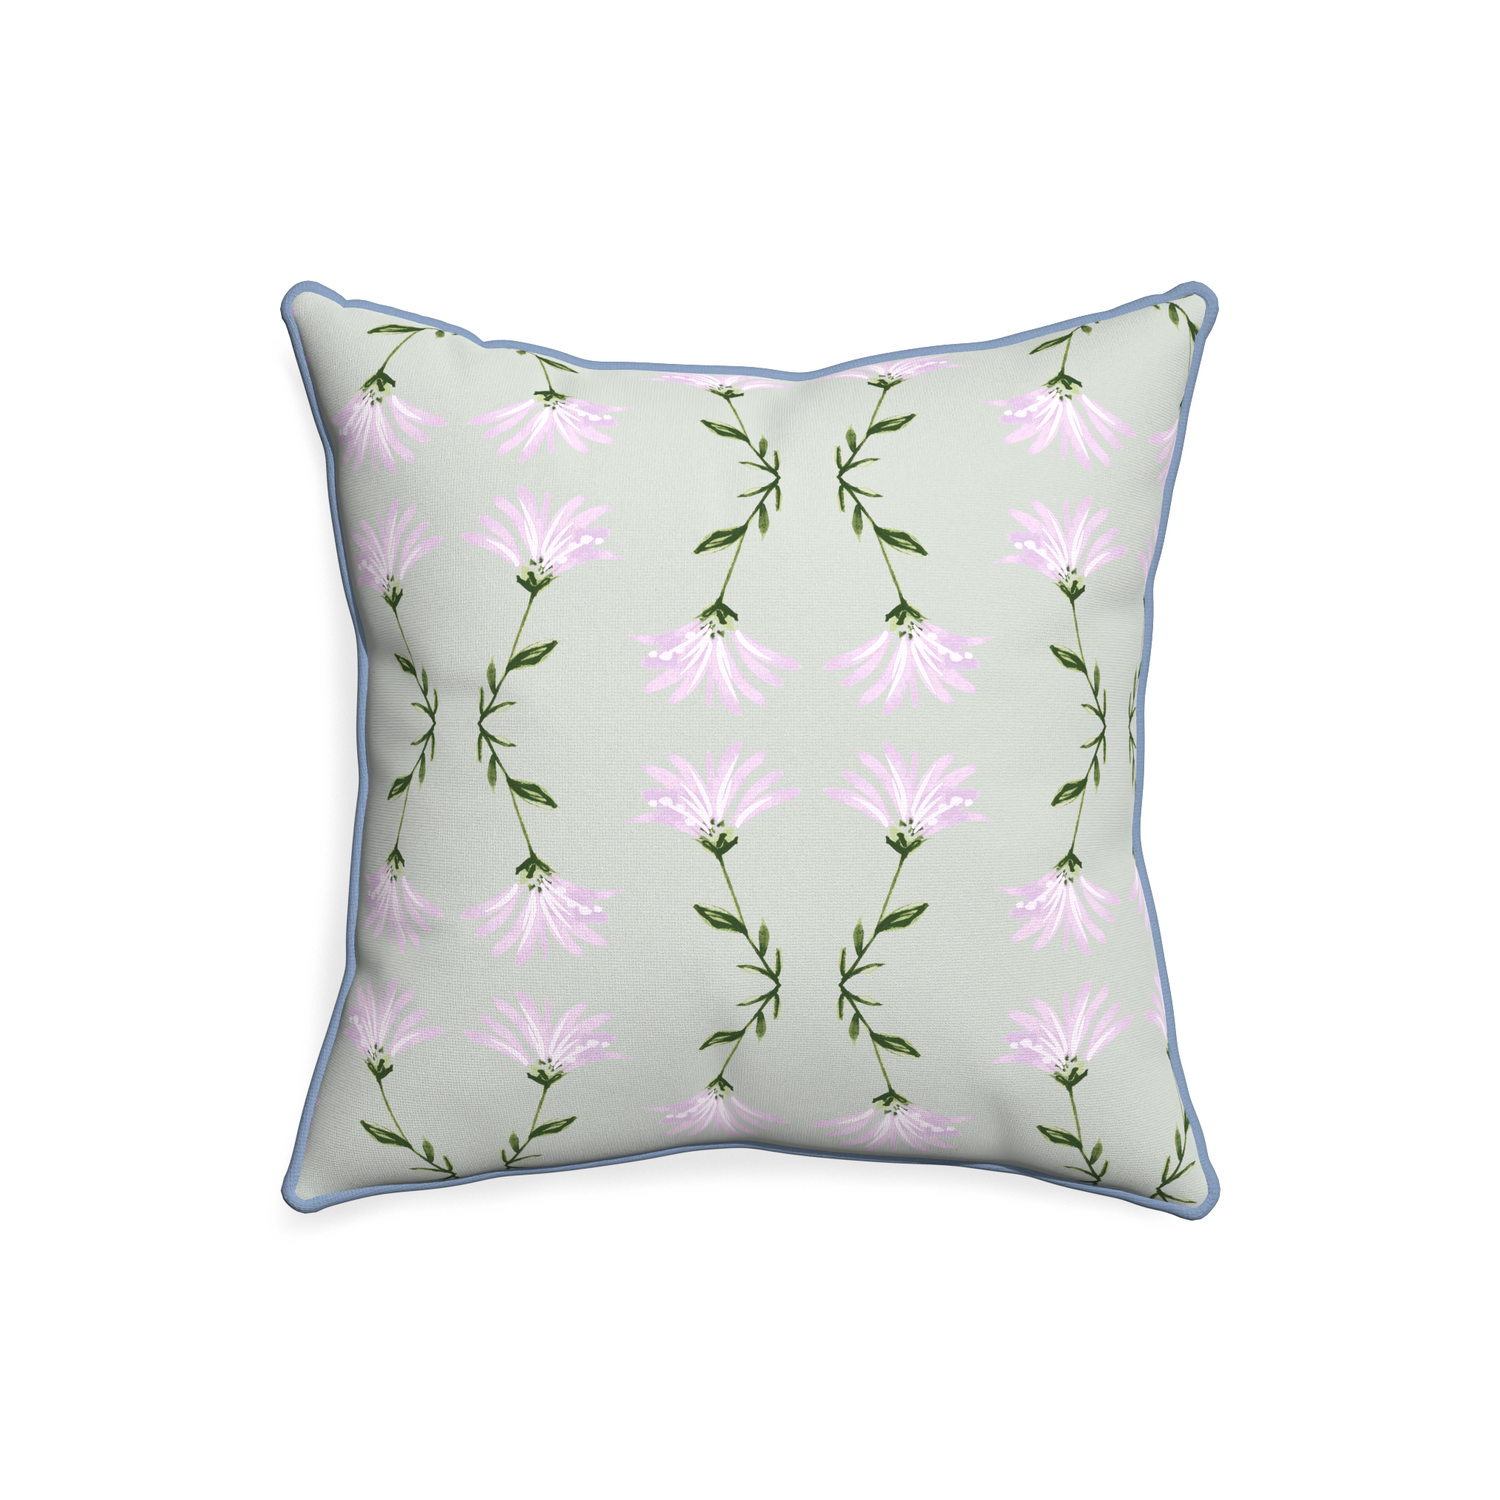 20-square marina sage custom pillow with sky piping on white background